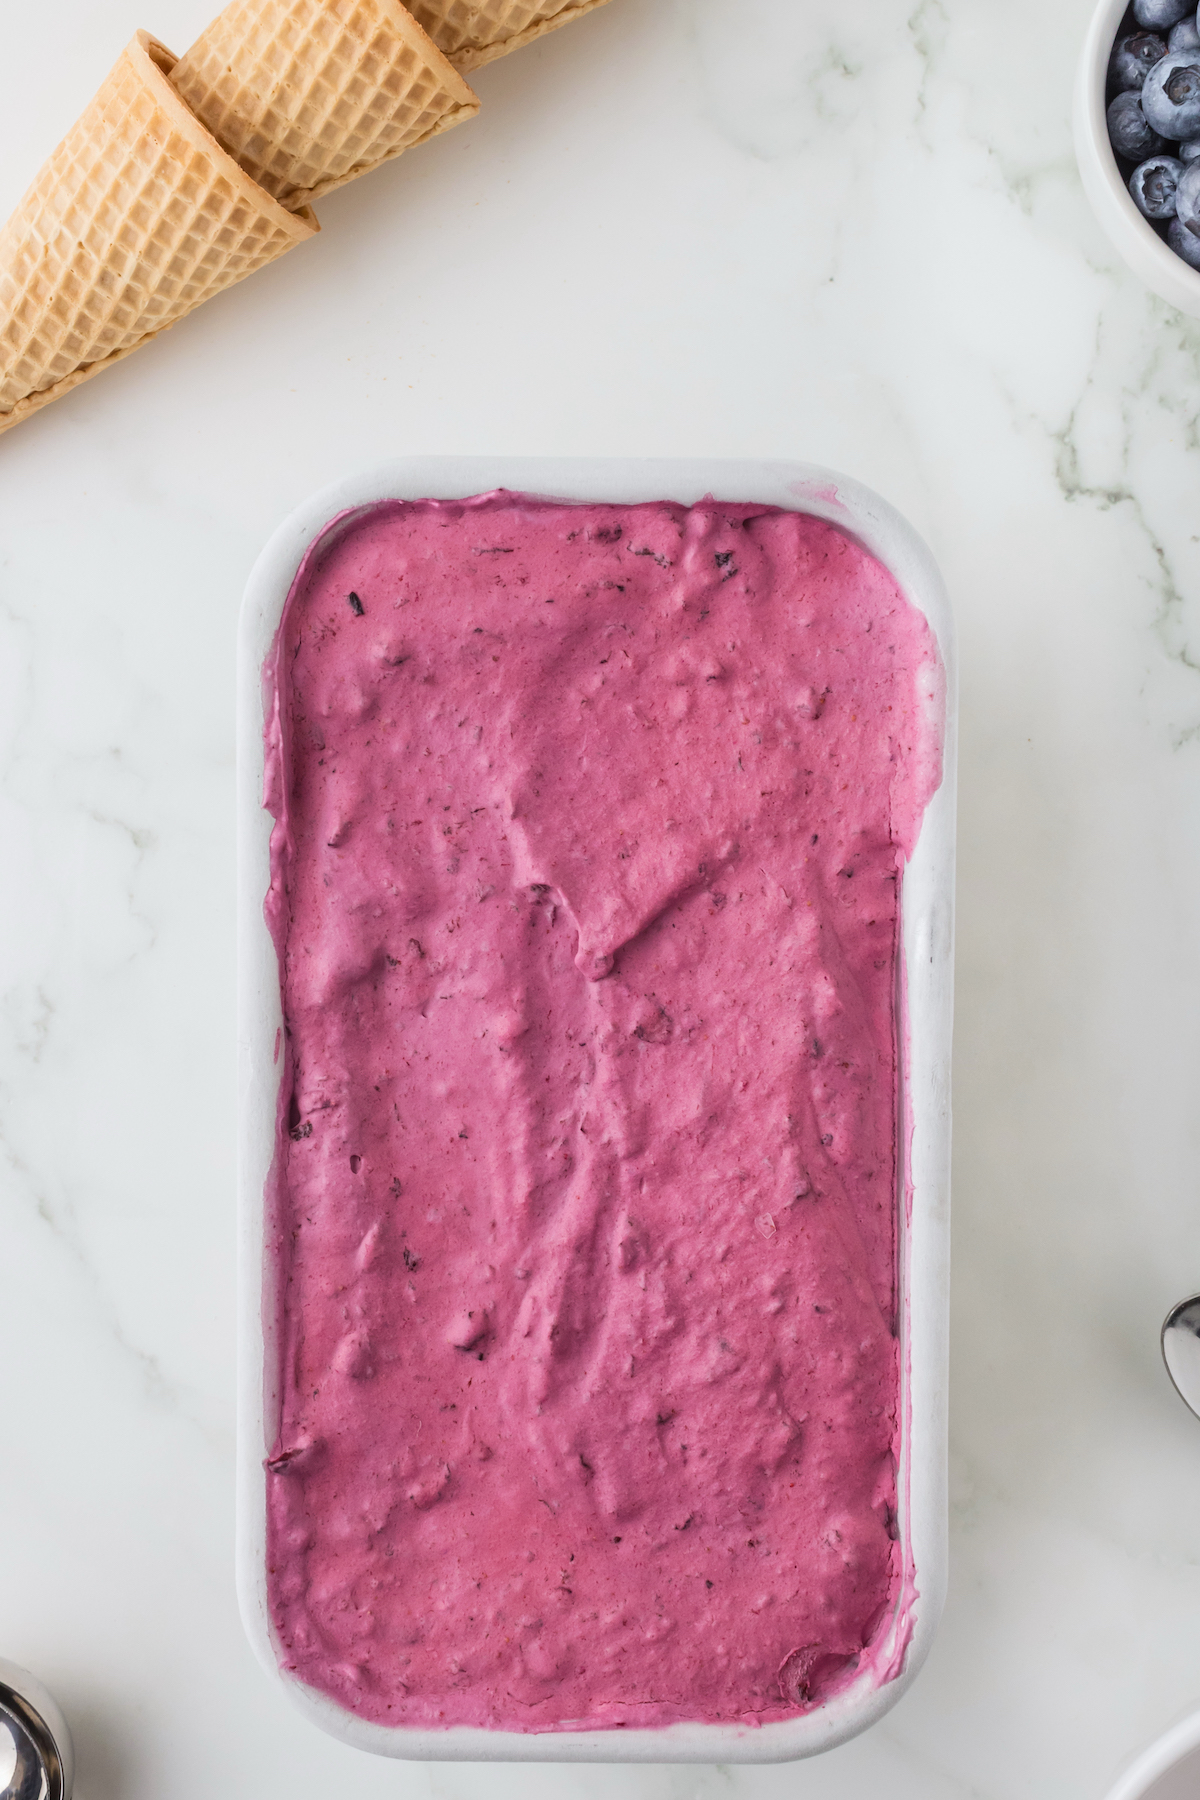 Frozen blueberry ice cream thawing on the counter